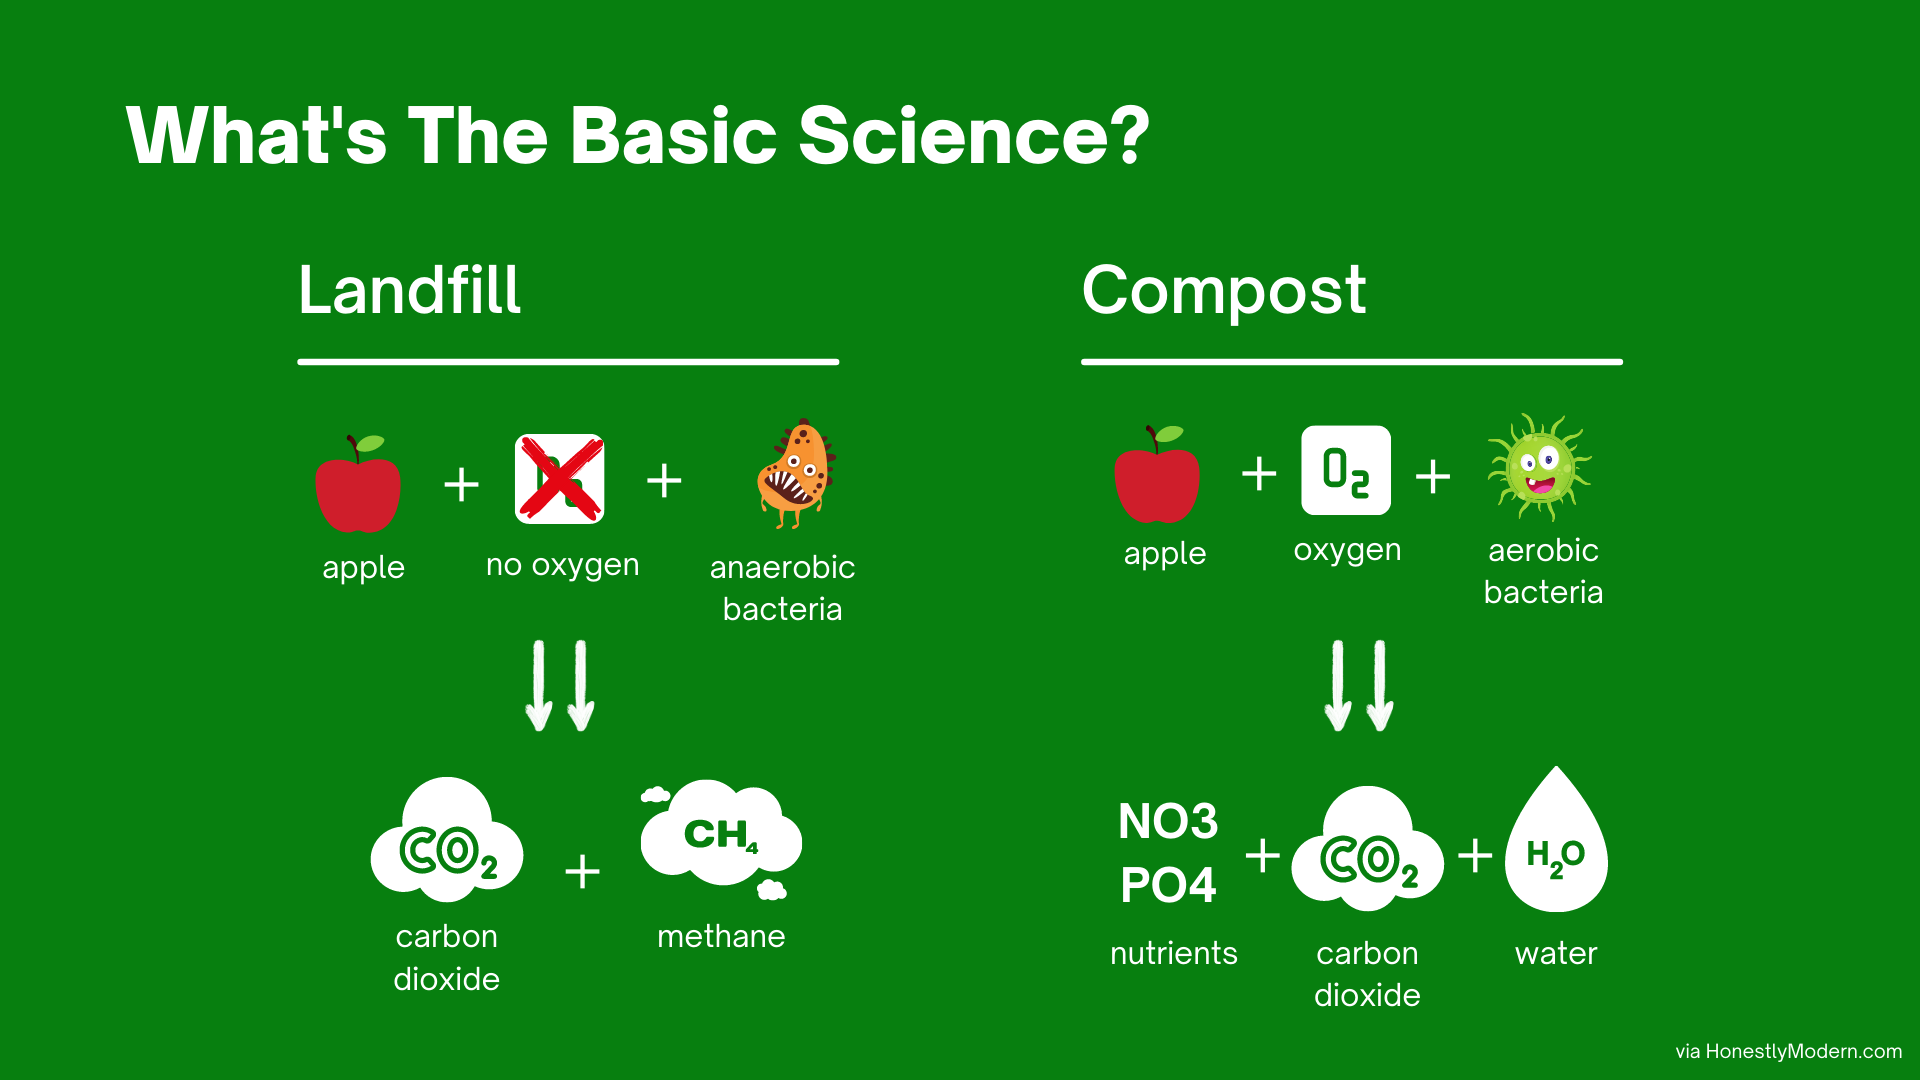 Diagram of the the basic chemistry reaction of what happens to food scraps when they go to a landfill vs. go to a compost bin